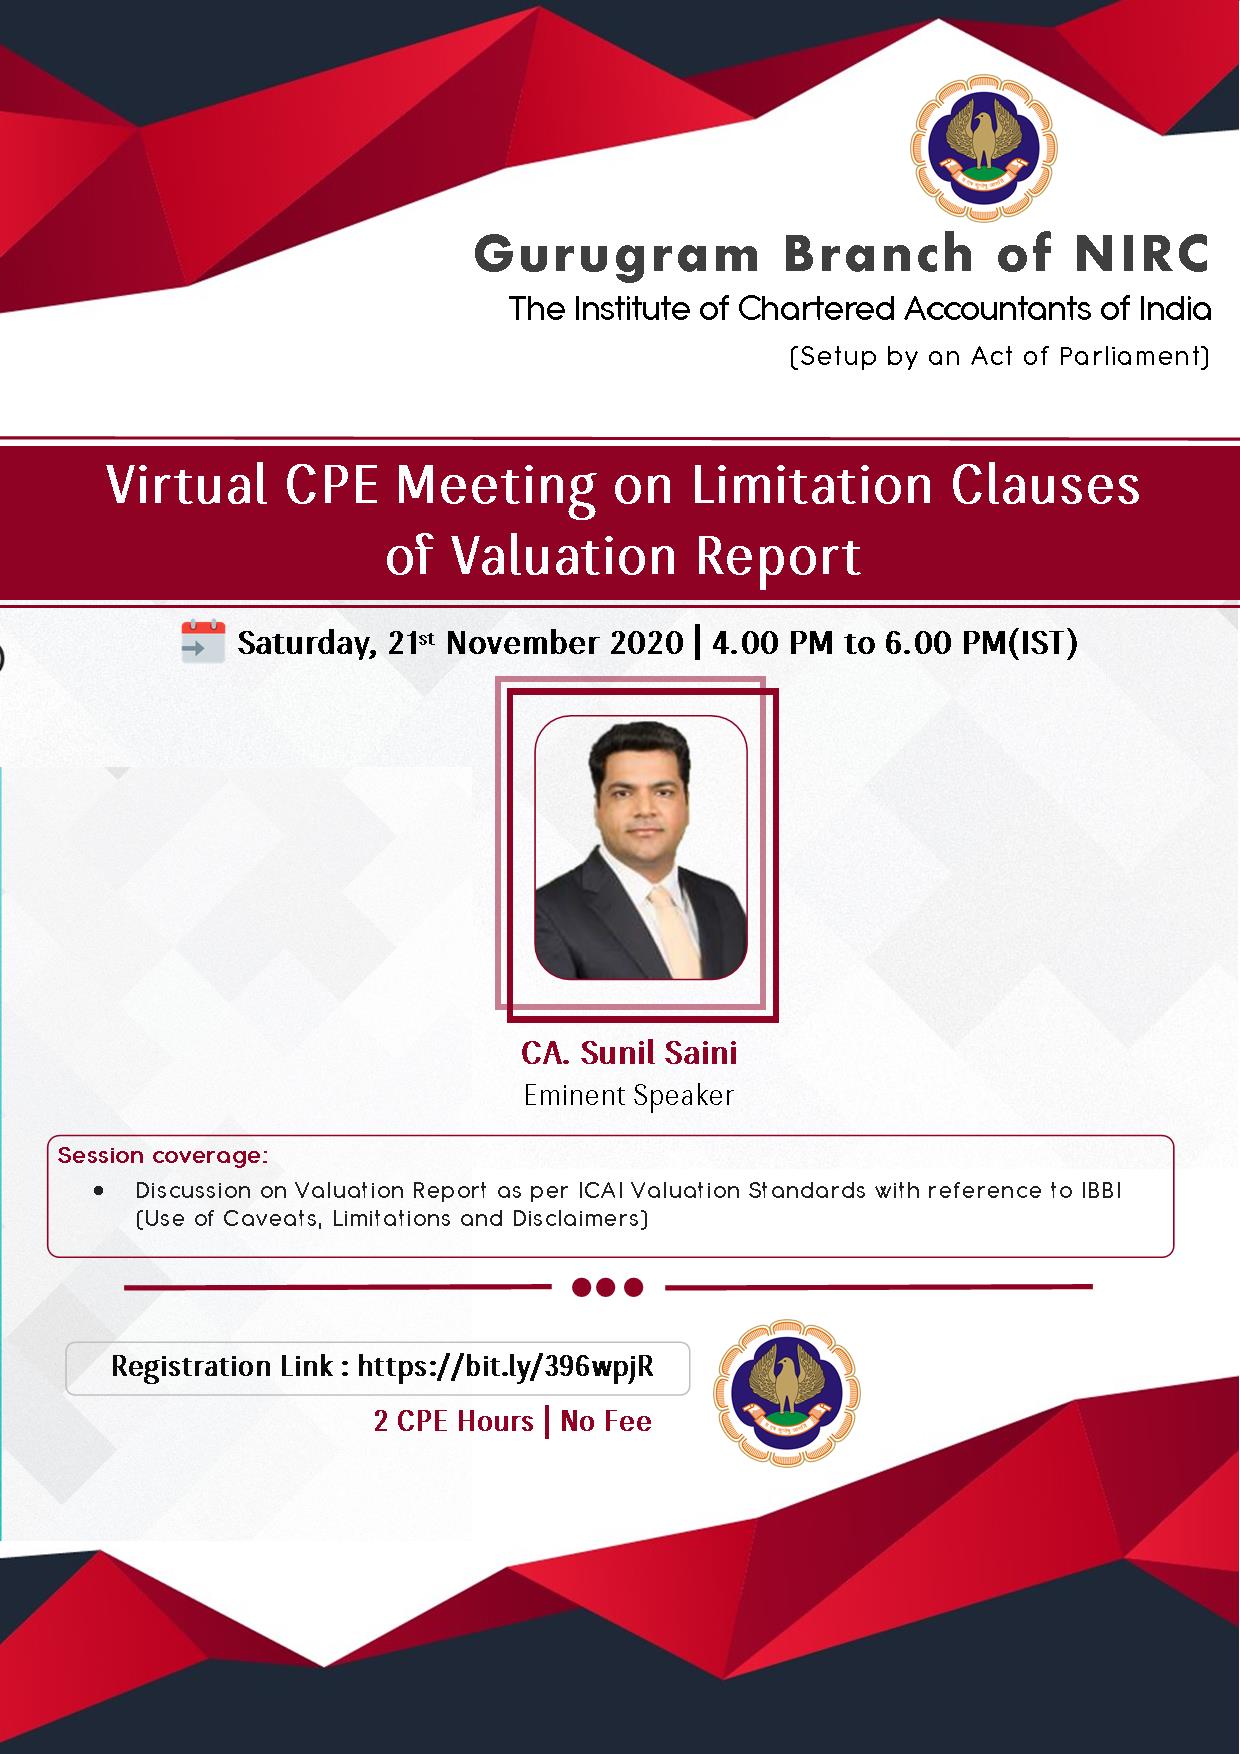 Virtual CPE Meeting on Limitation Clauses of Valuation Report